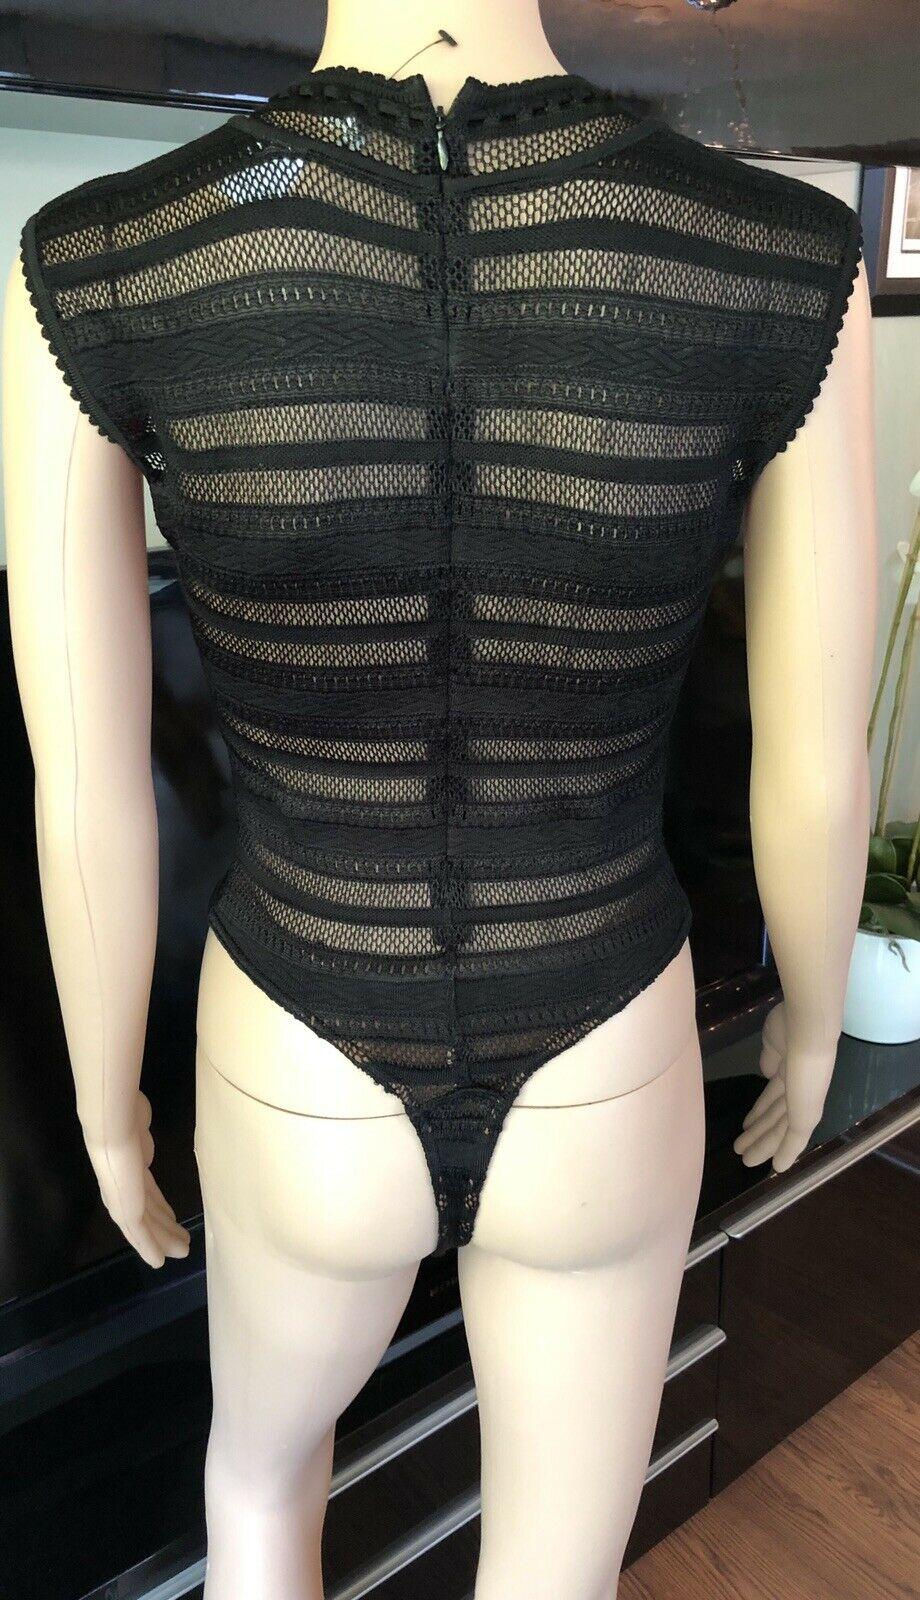 Azzedine Alaia Vintage Semi-Sheer Bodysuit Top Size M

Black Alaïa scoop neck sleeveless bodysuit with eyelet pattern and zip closure at back.

All Eyes on Alaïa

For the last half-century, the world’s most fashionable and adventuresome women have